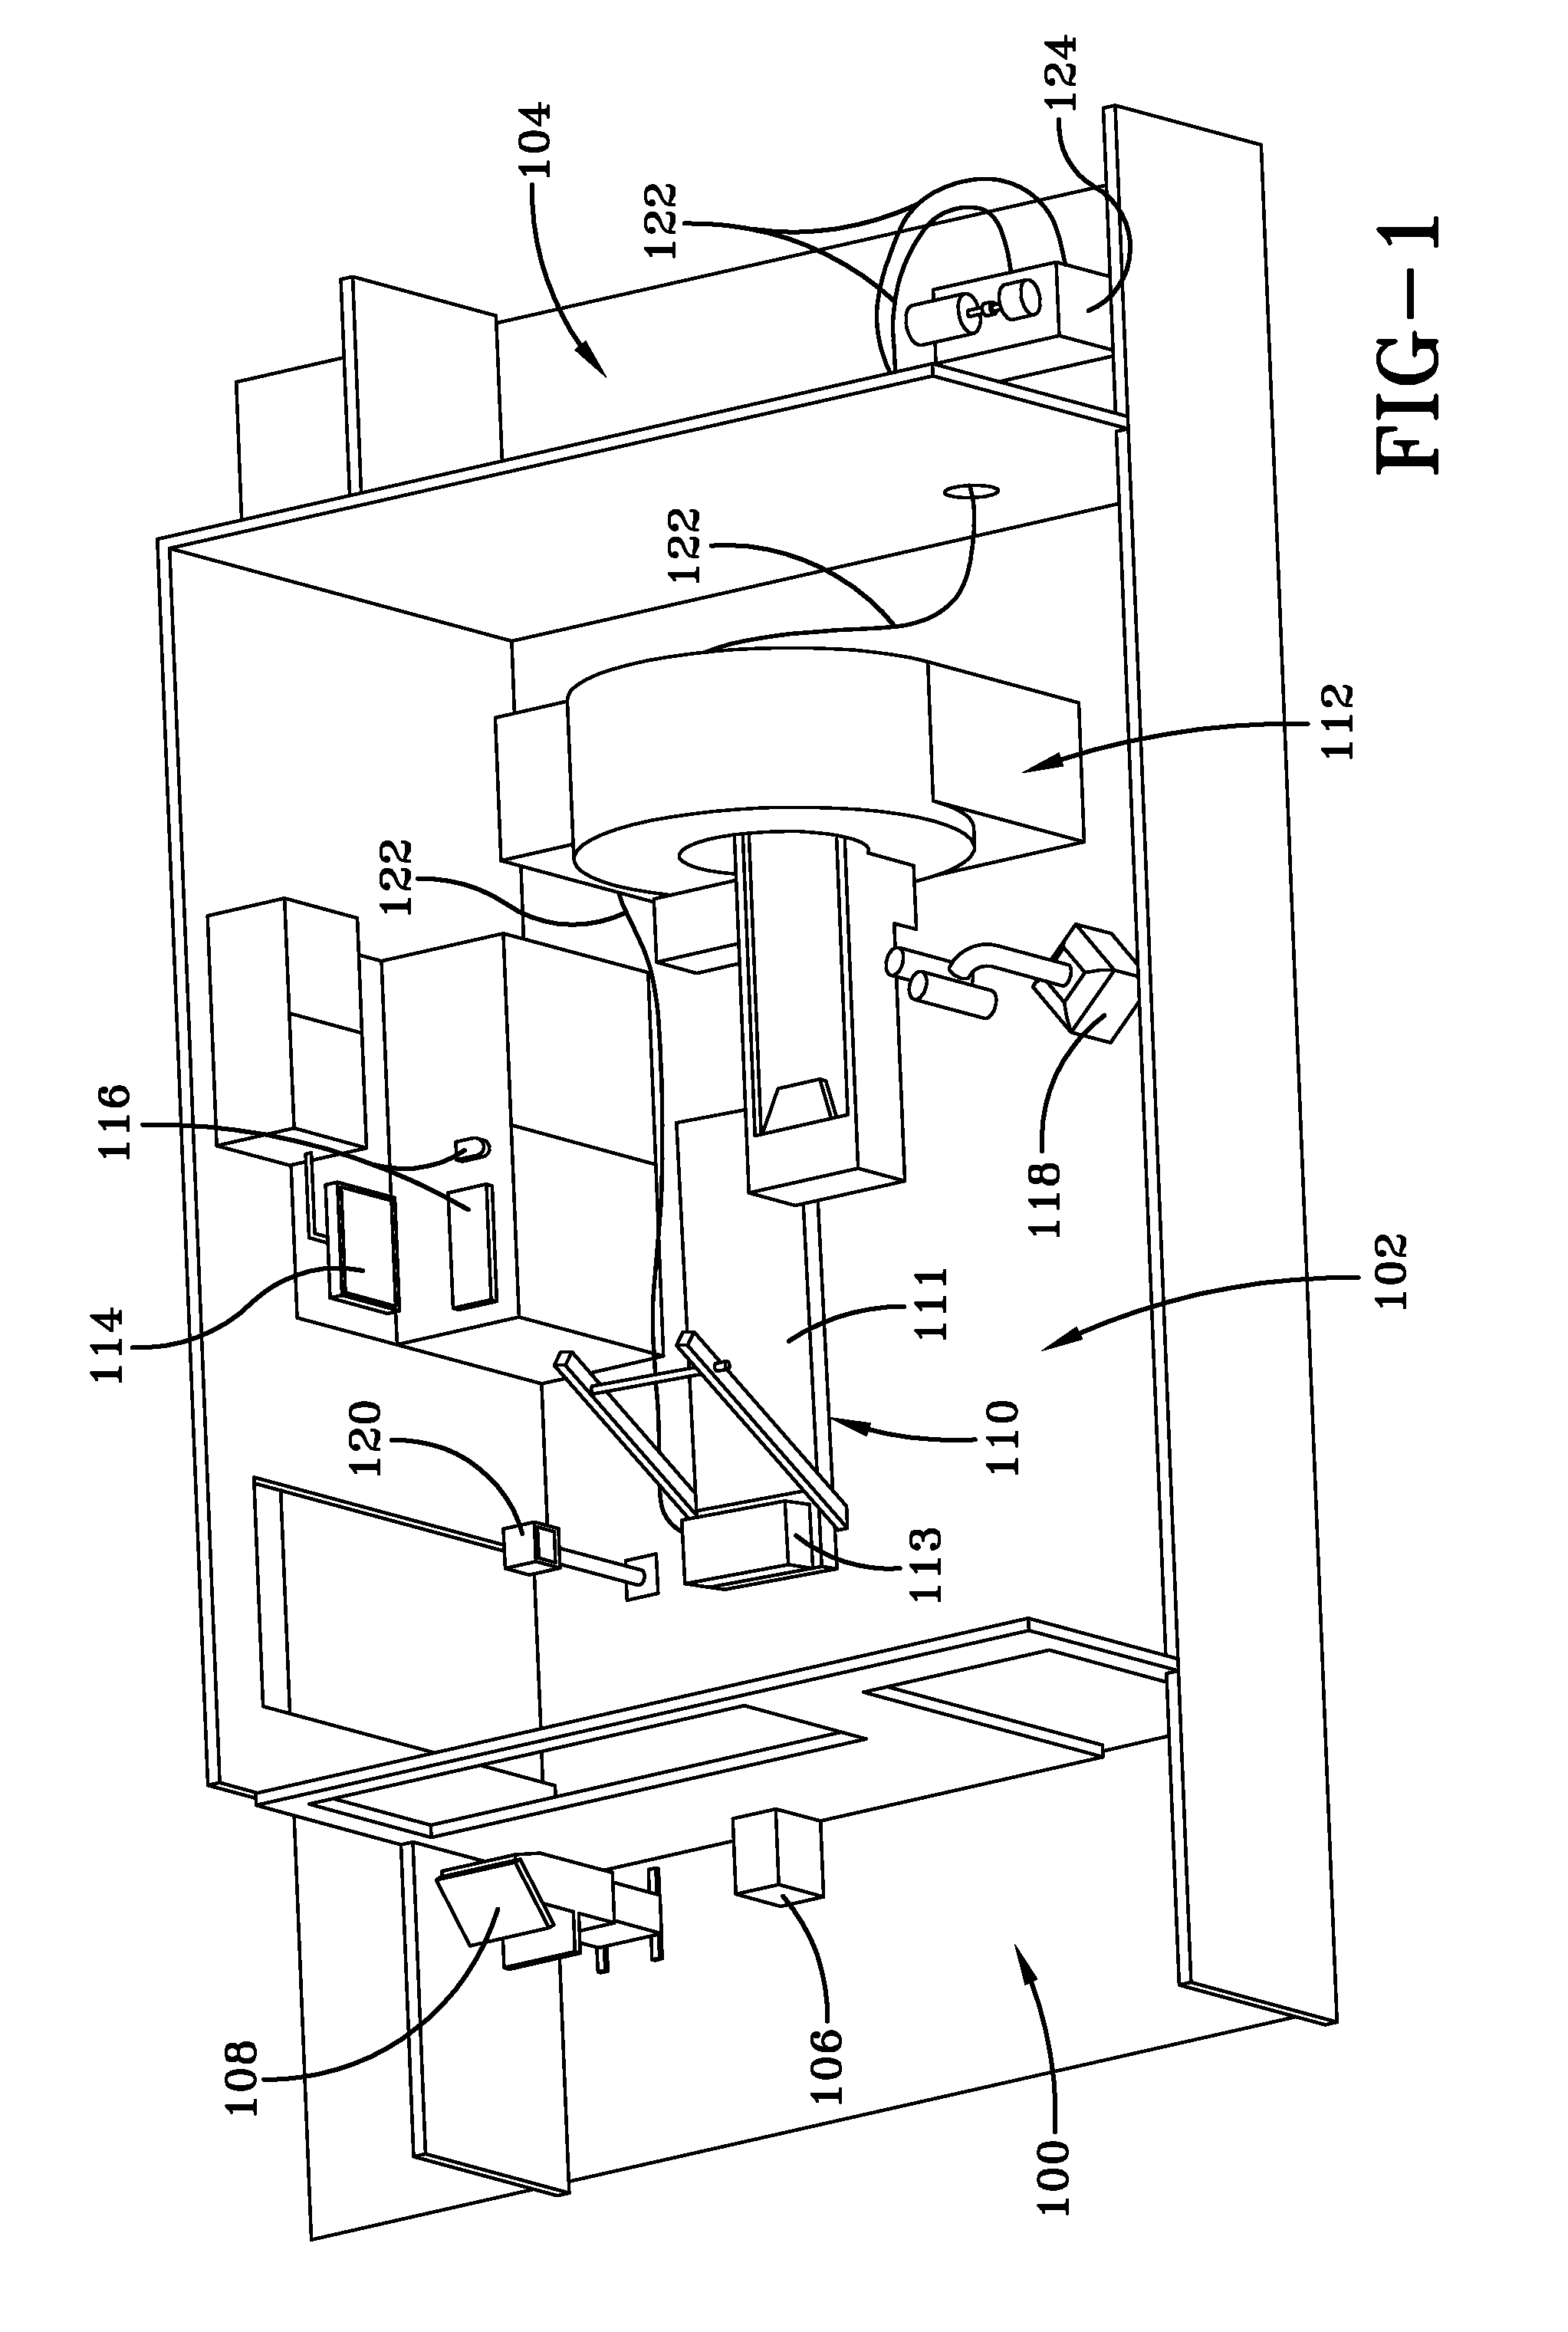 System and method for cardiovascular exercise stress MRI